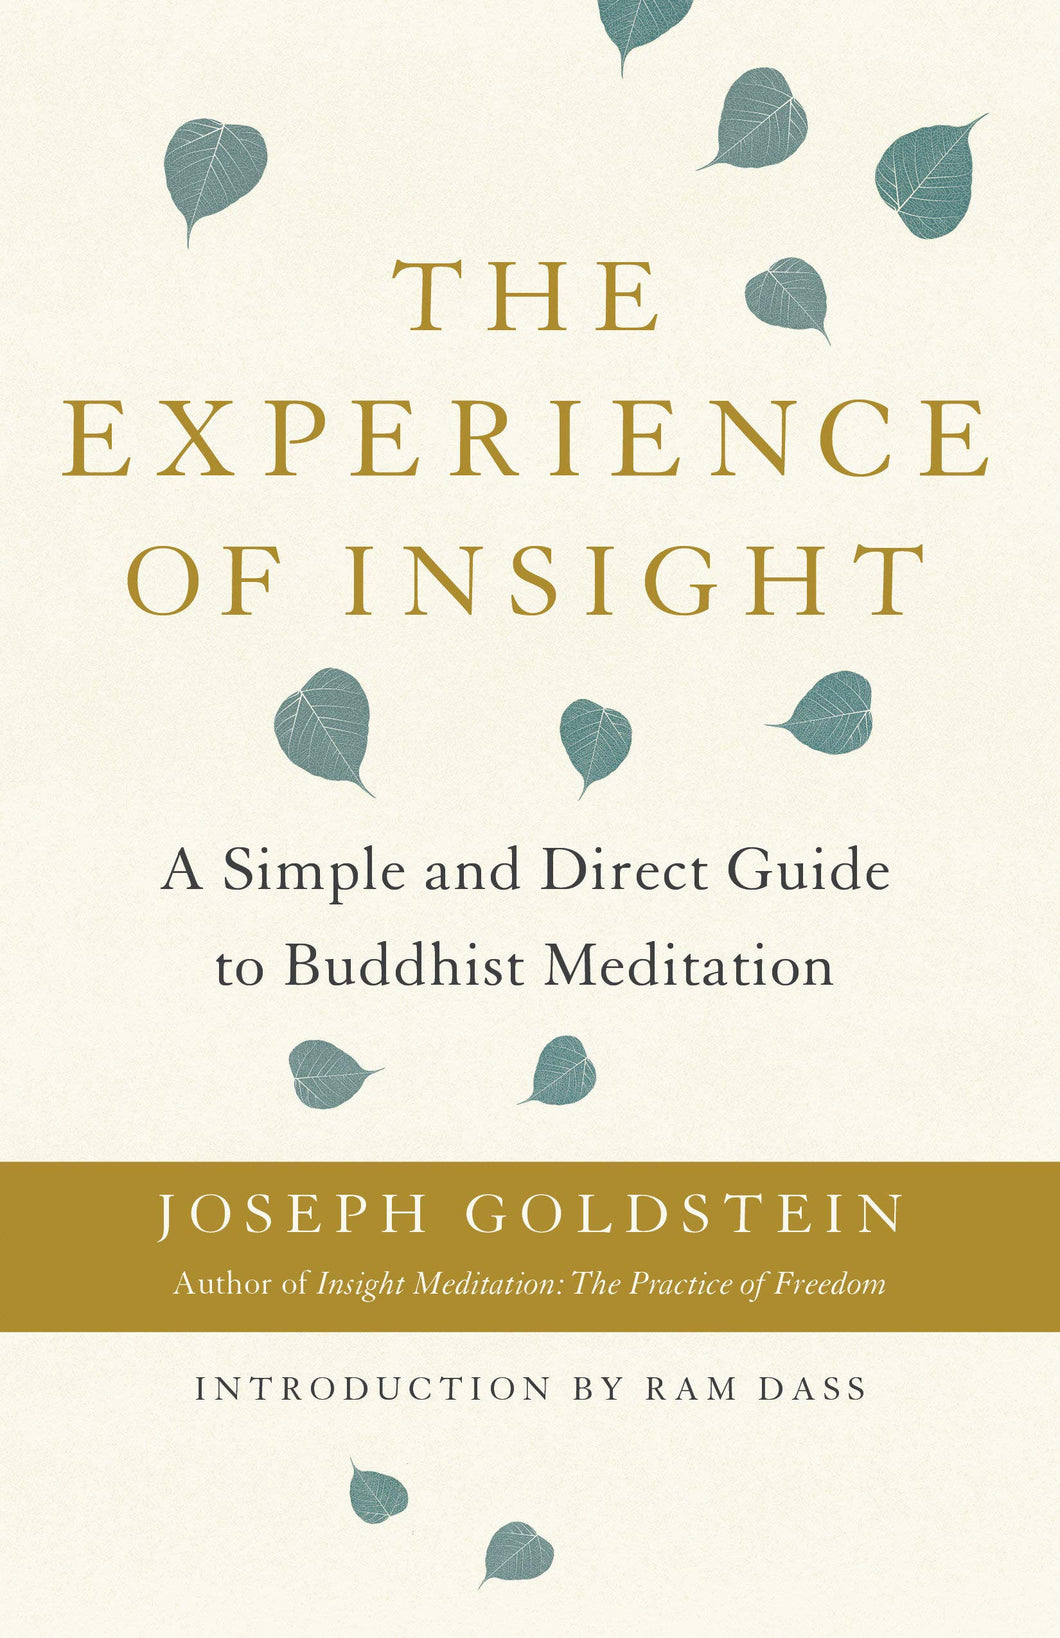 The Experience of Insight: A Simple and Direct Guide to Buddhist Meditation [Joseph Goldstein]